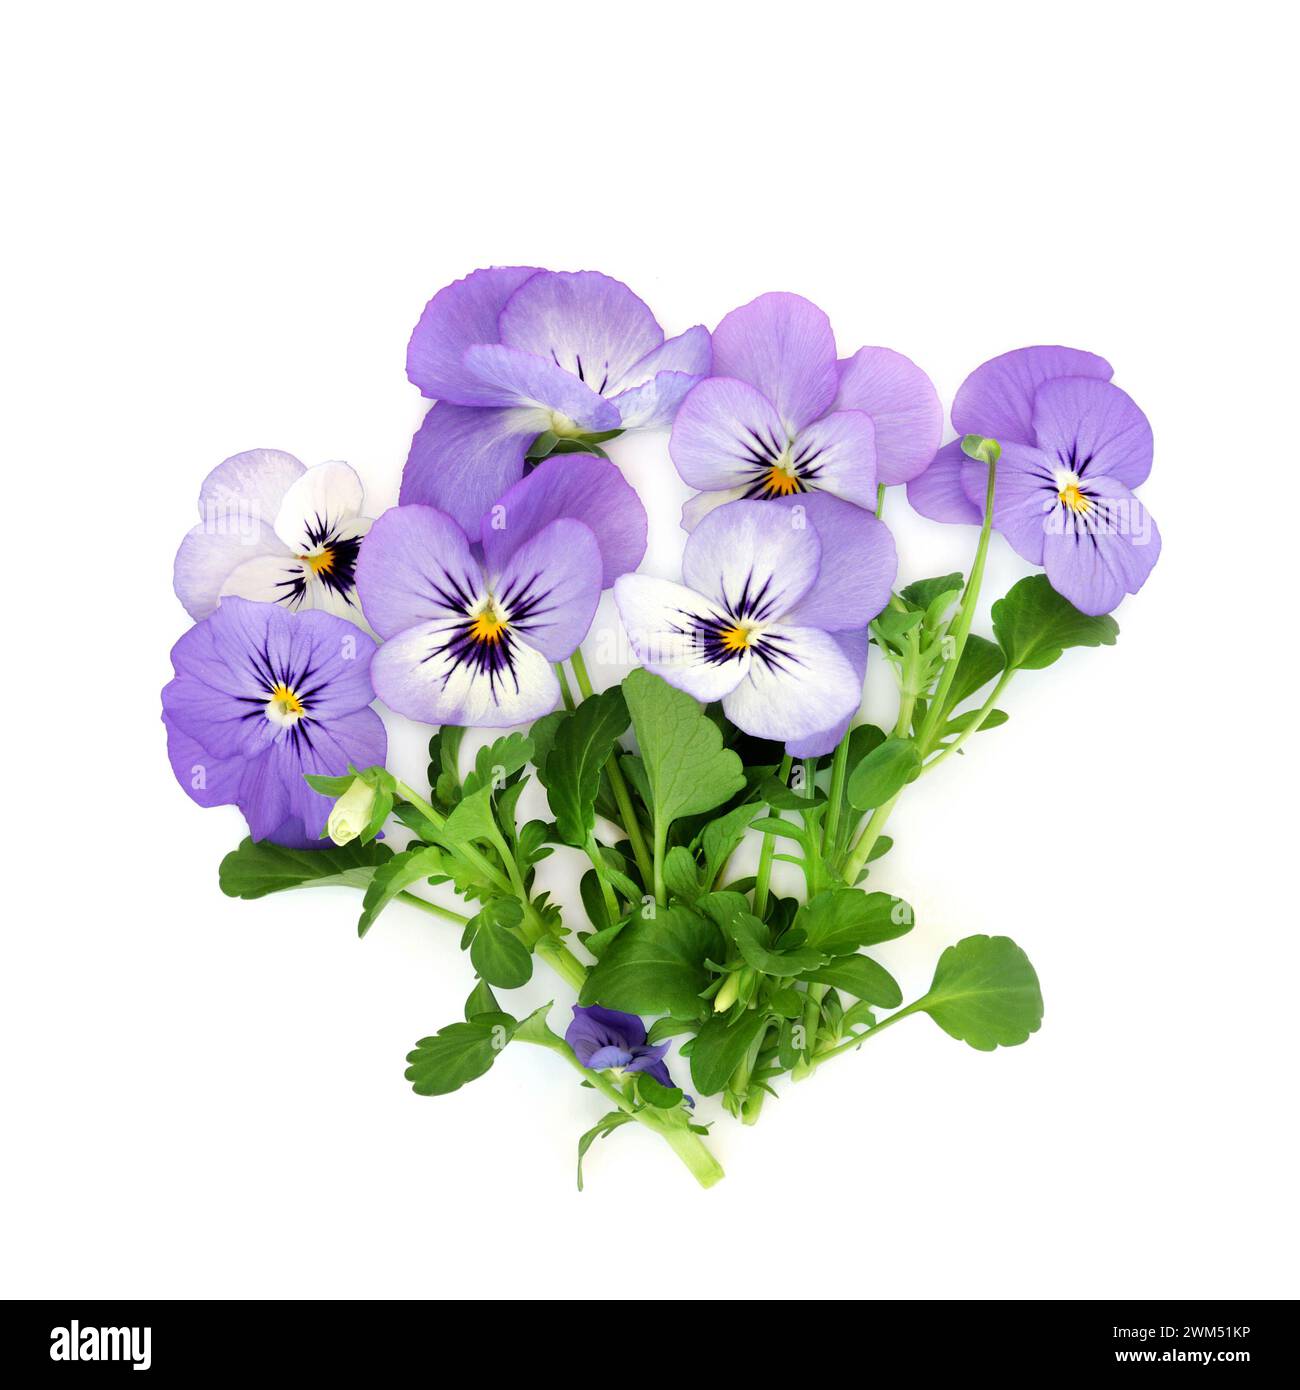 Purple pansy viola flowers on white background. Healthy food and garnish decoration. High in vitamin A and C Symbol of love, remembrance, nobility. Stock Photo